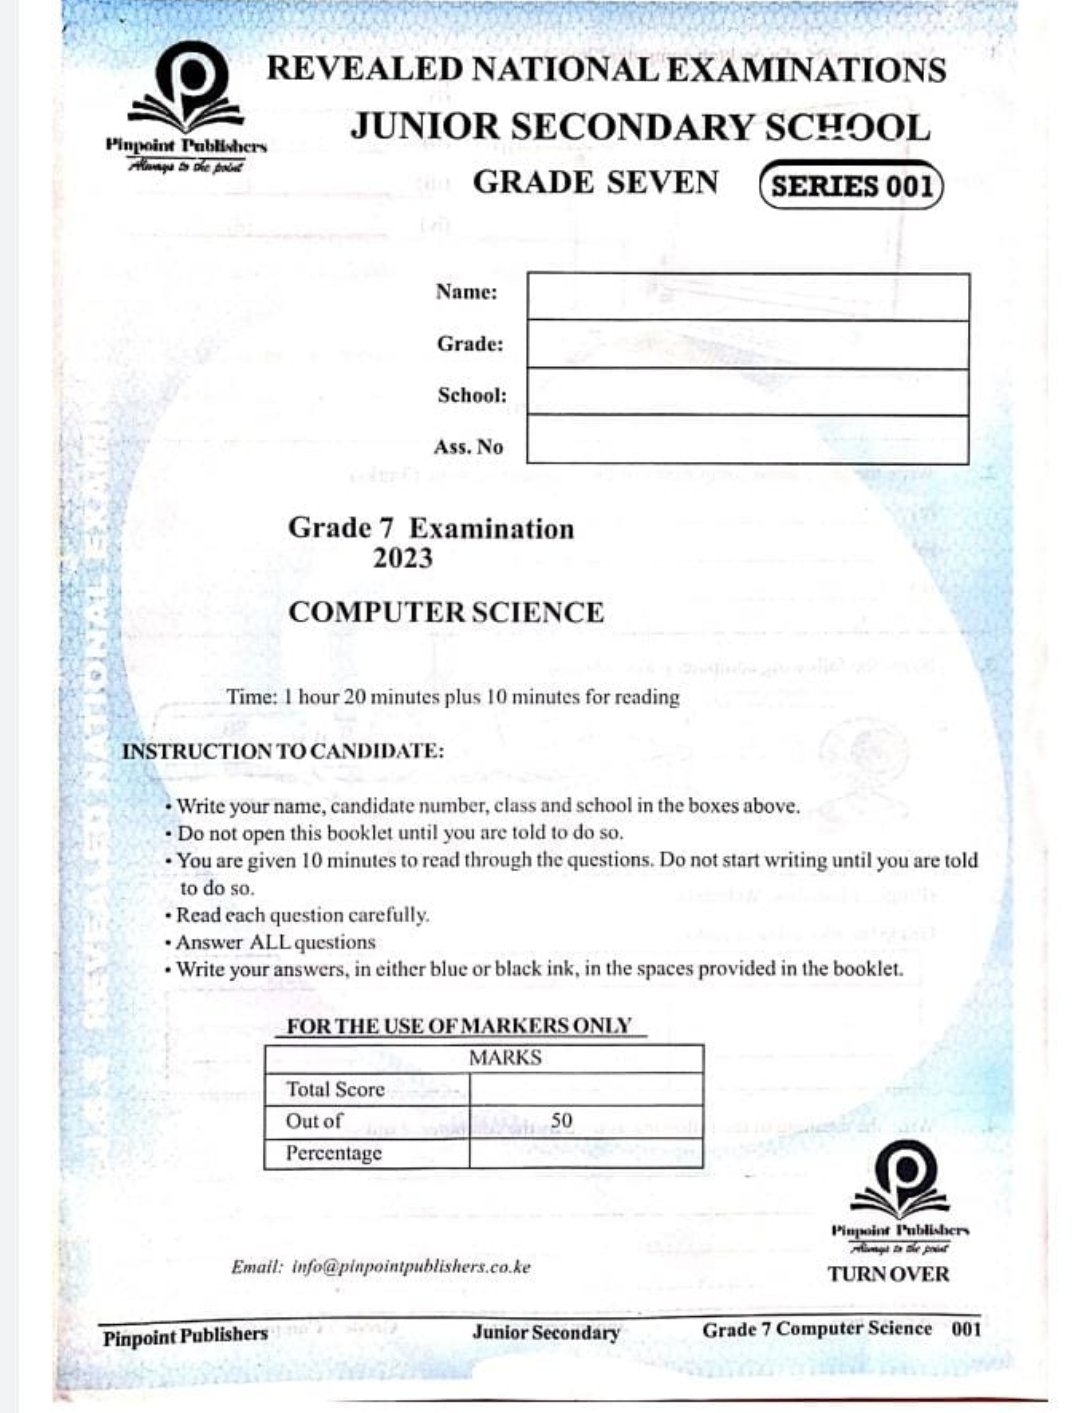 2023 Revealed National exam 001 grade 7 questions awith answers